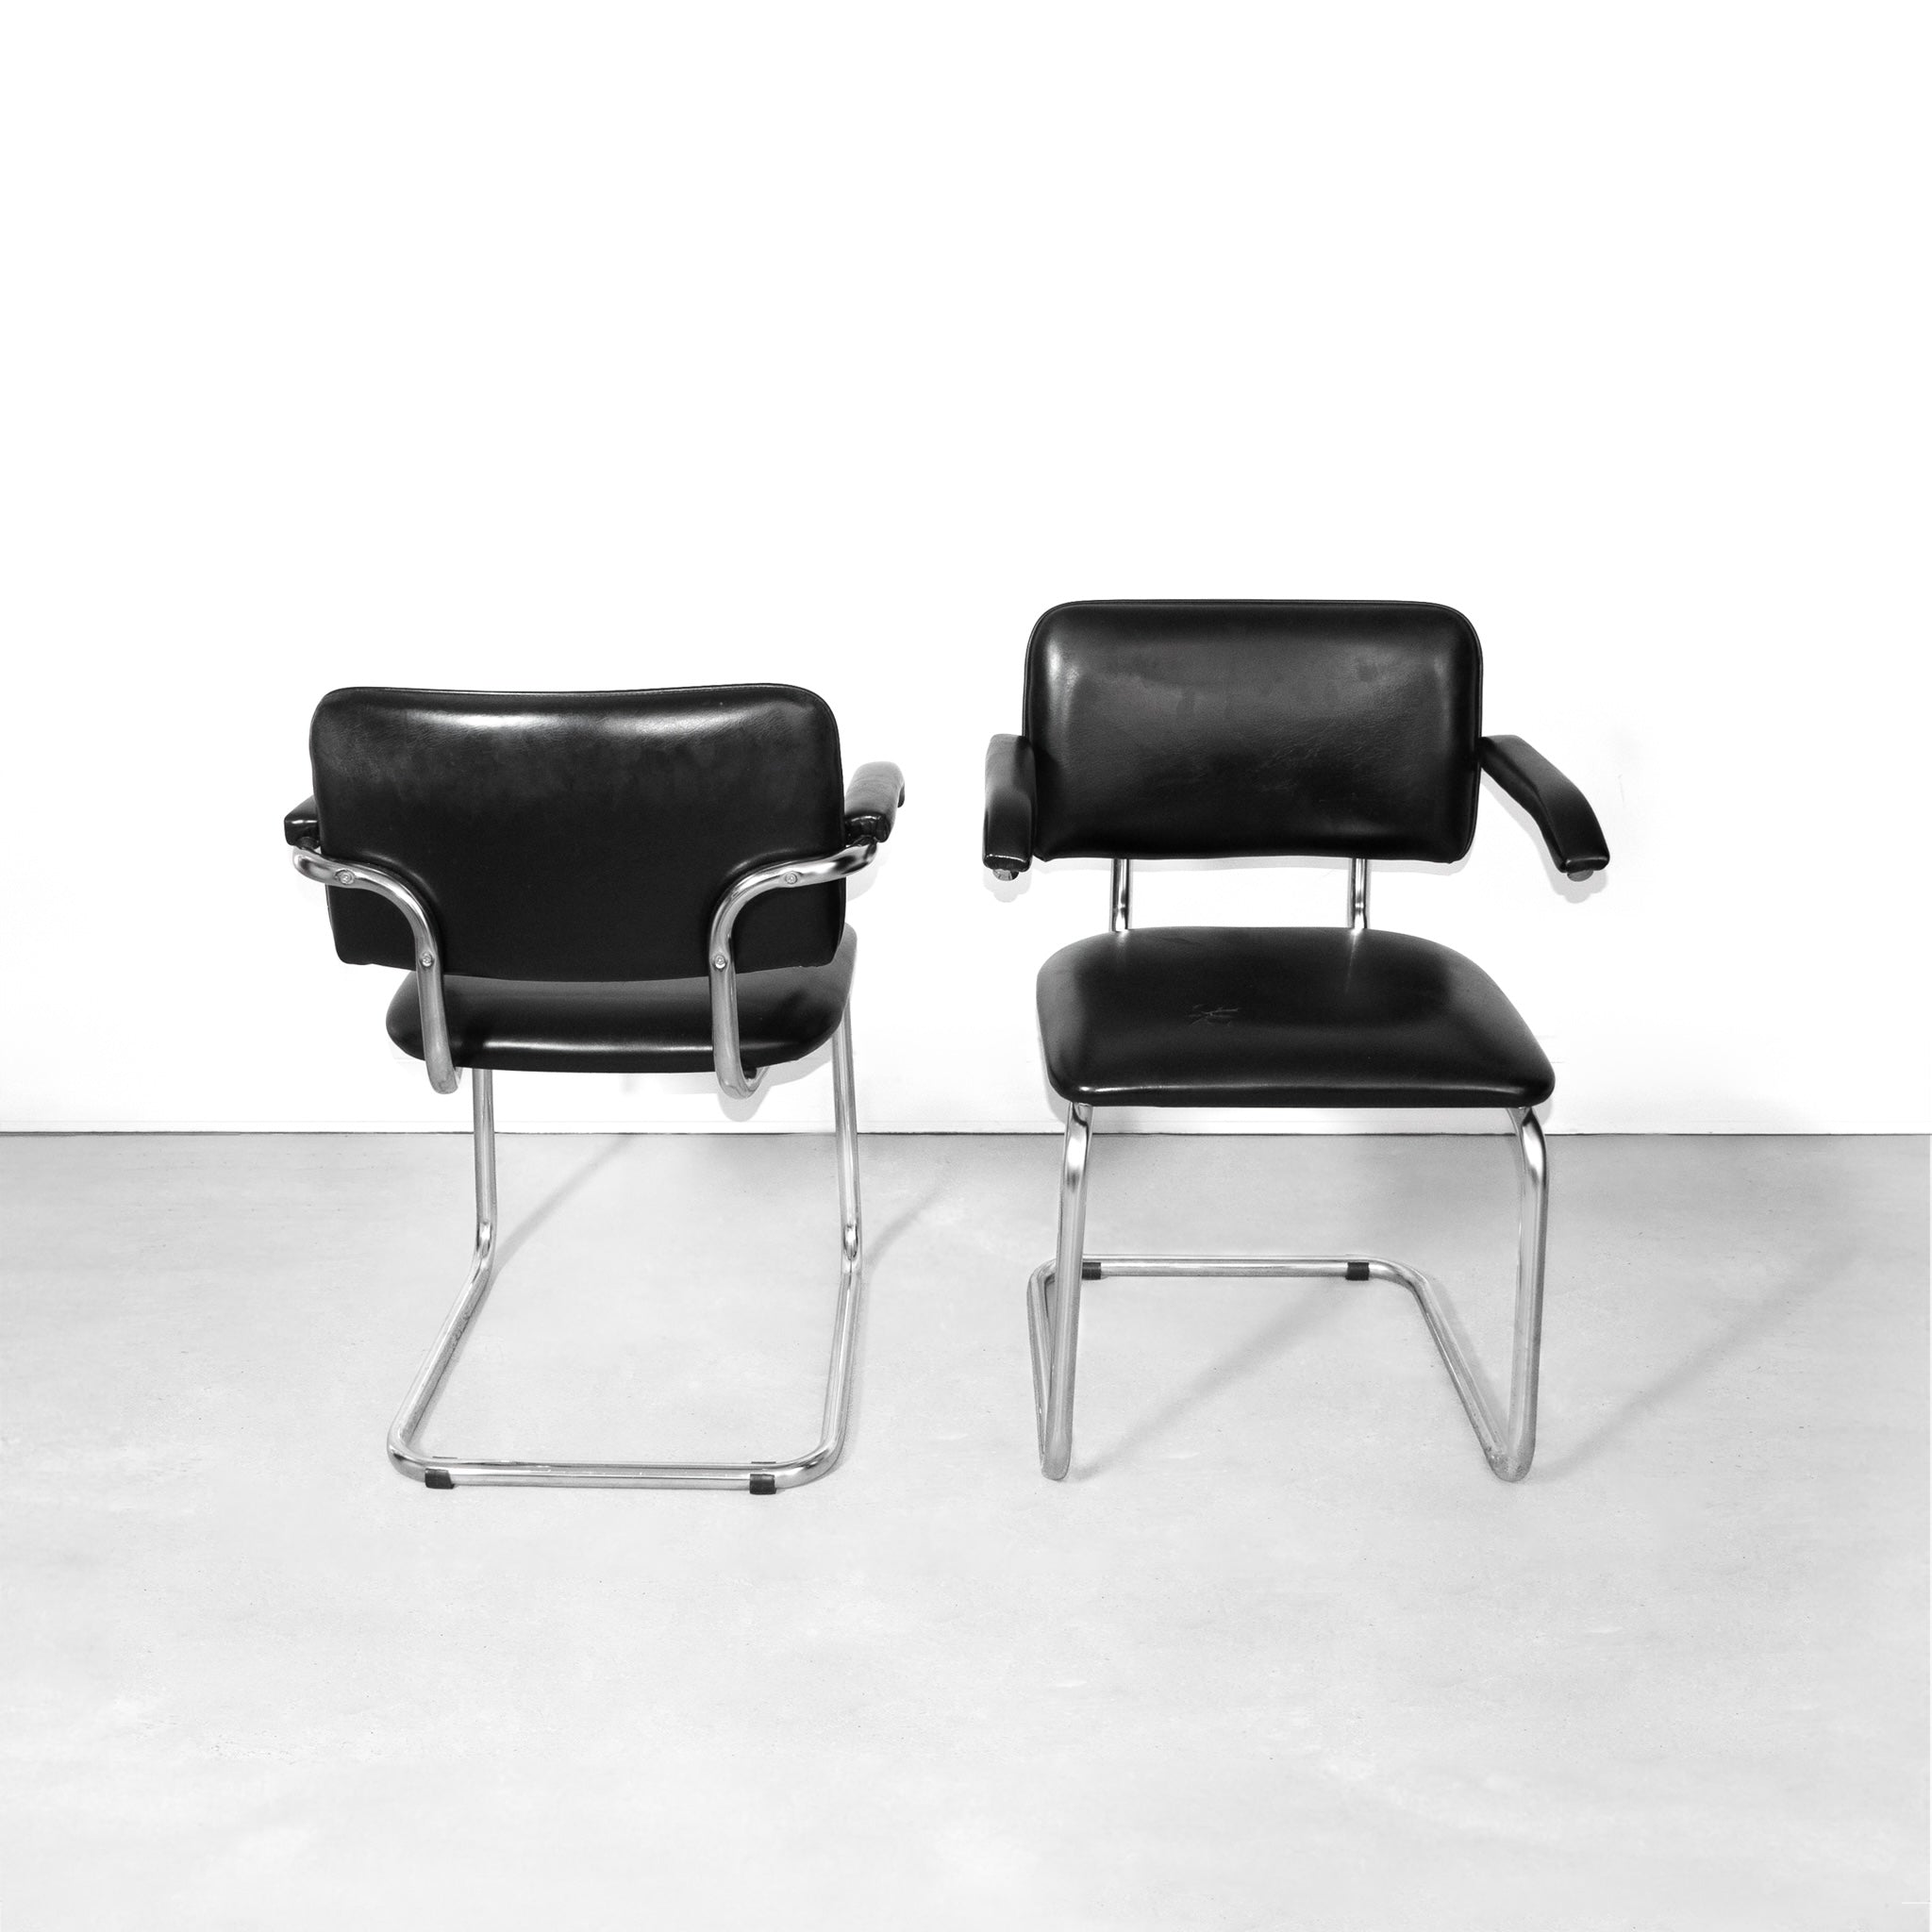 Pair of Mid-century Modern Black Leather Marcel Breuer Cesca Chairs